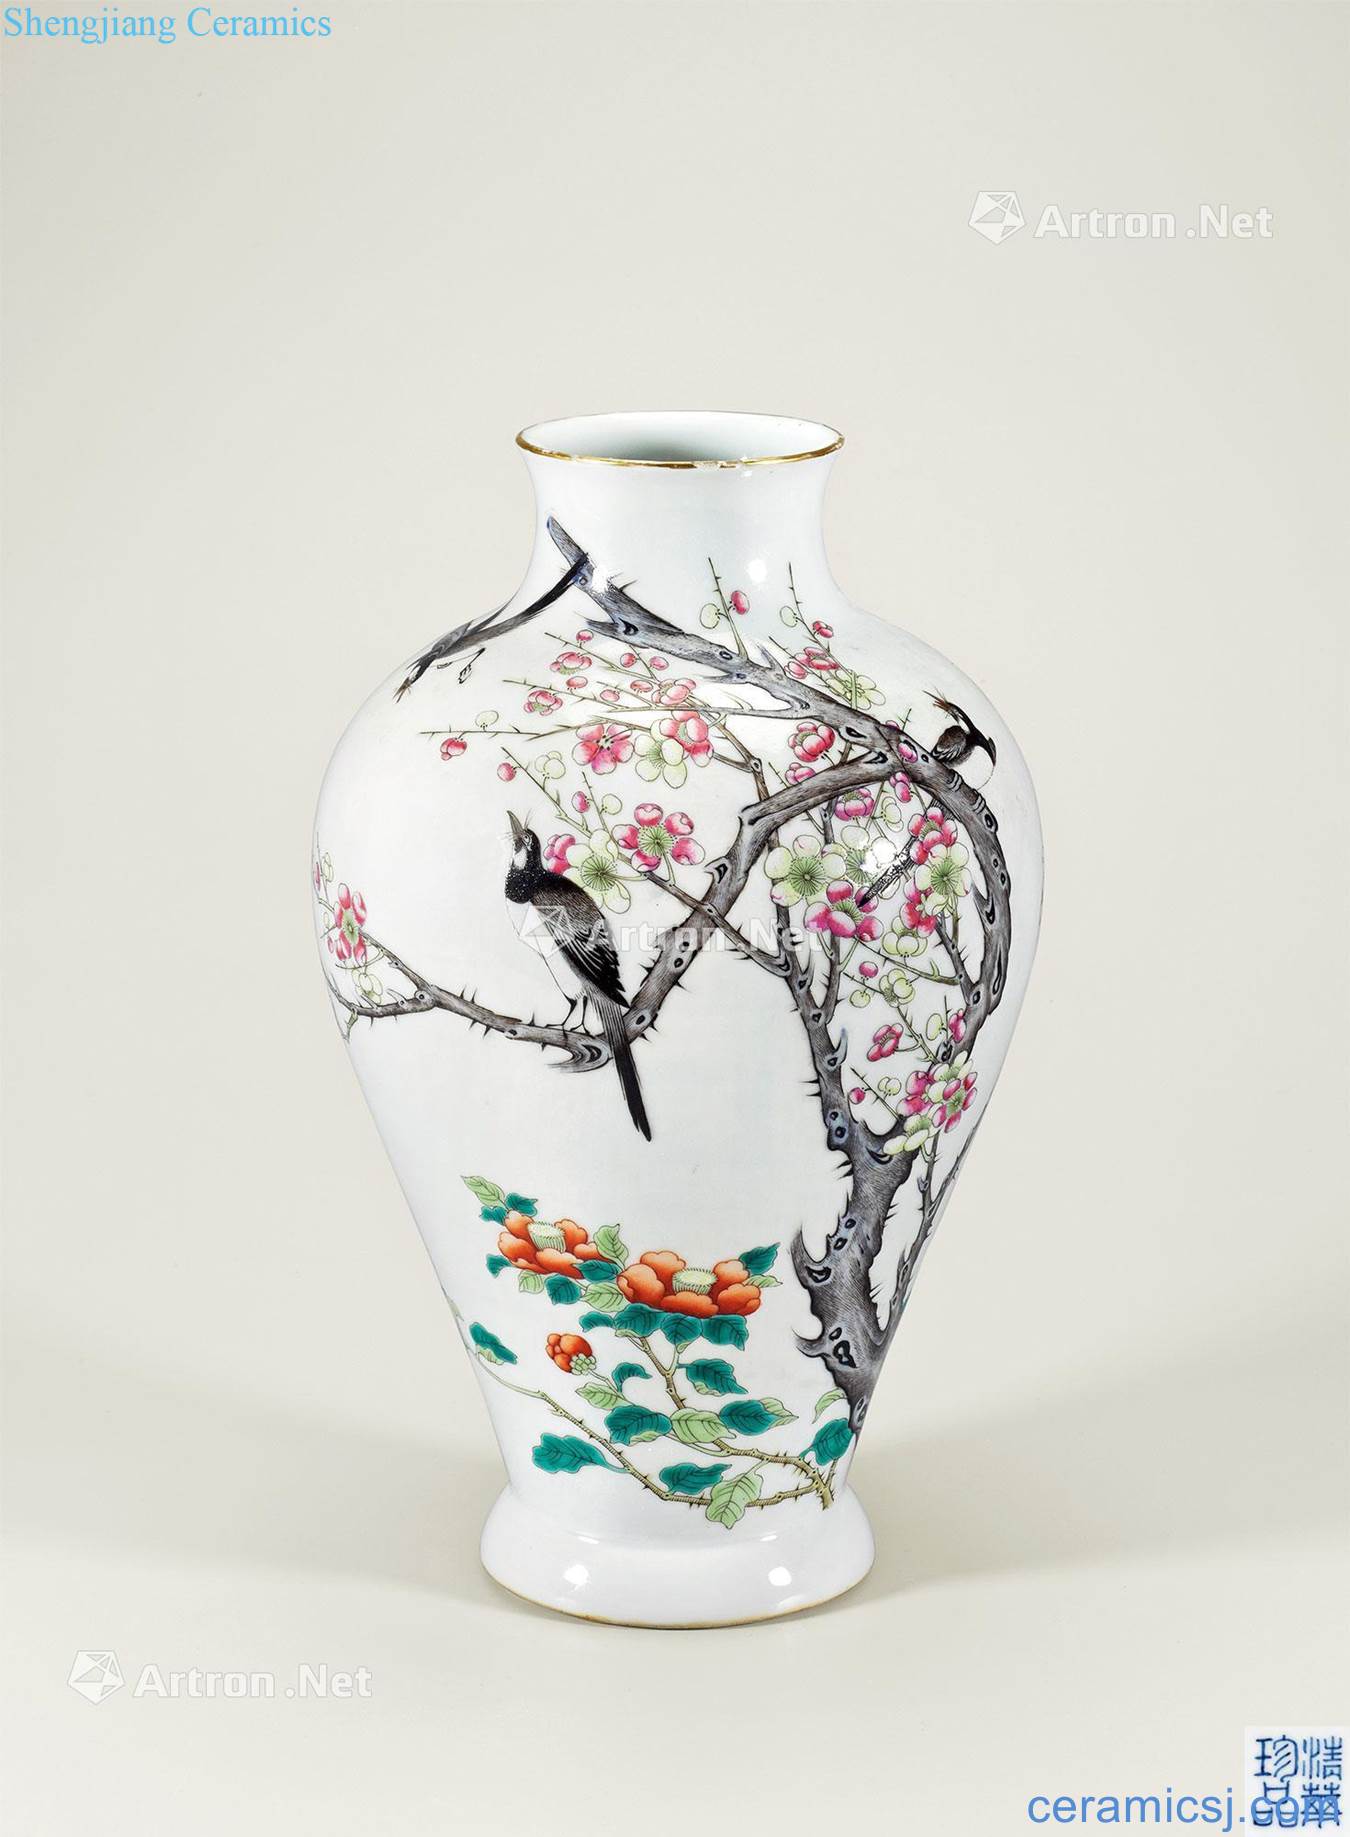 Beaming grain mei bottle pastel of the republic of China in late qing dynasty